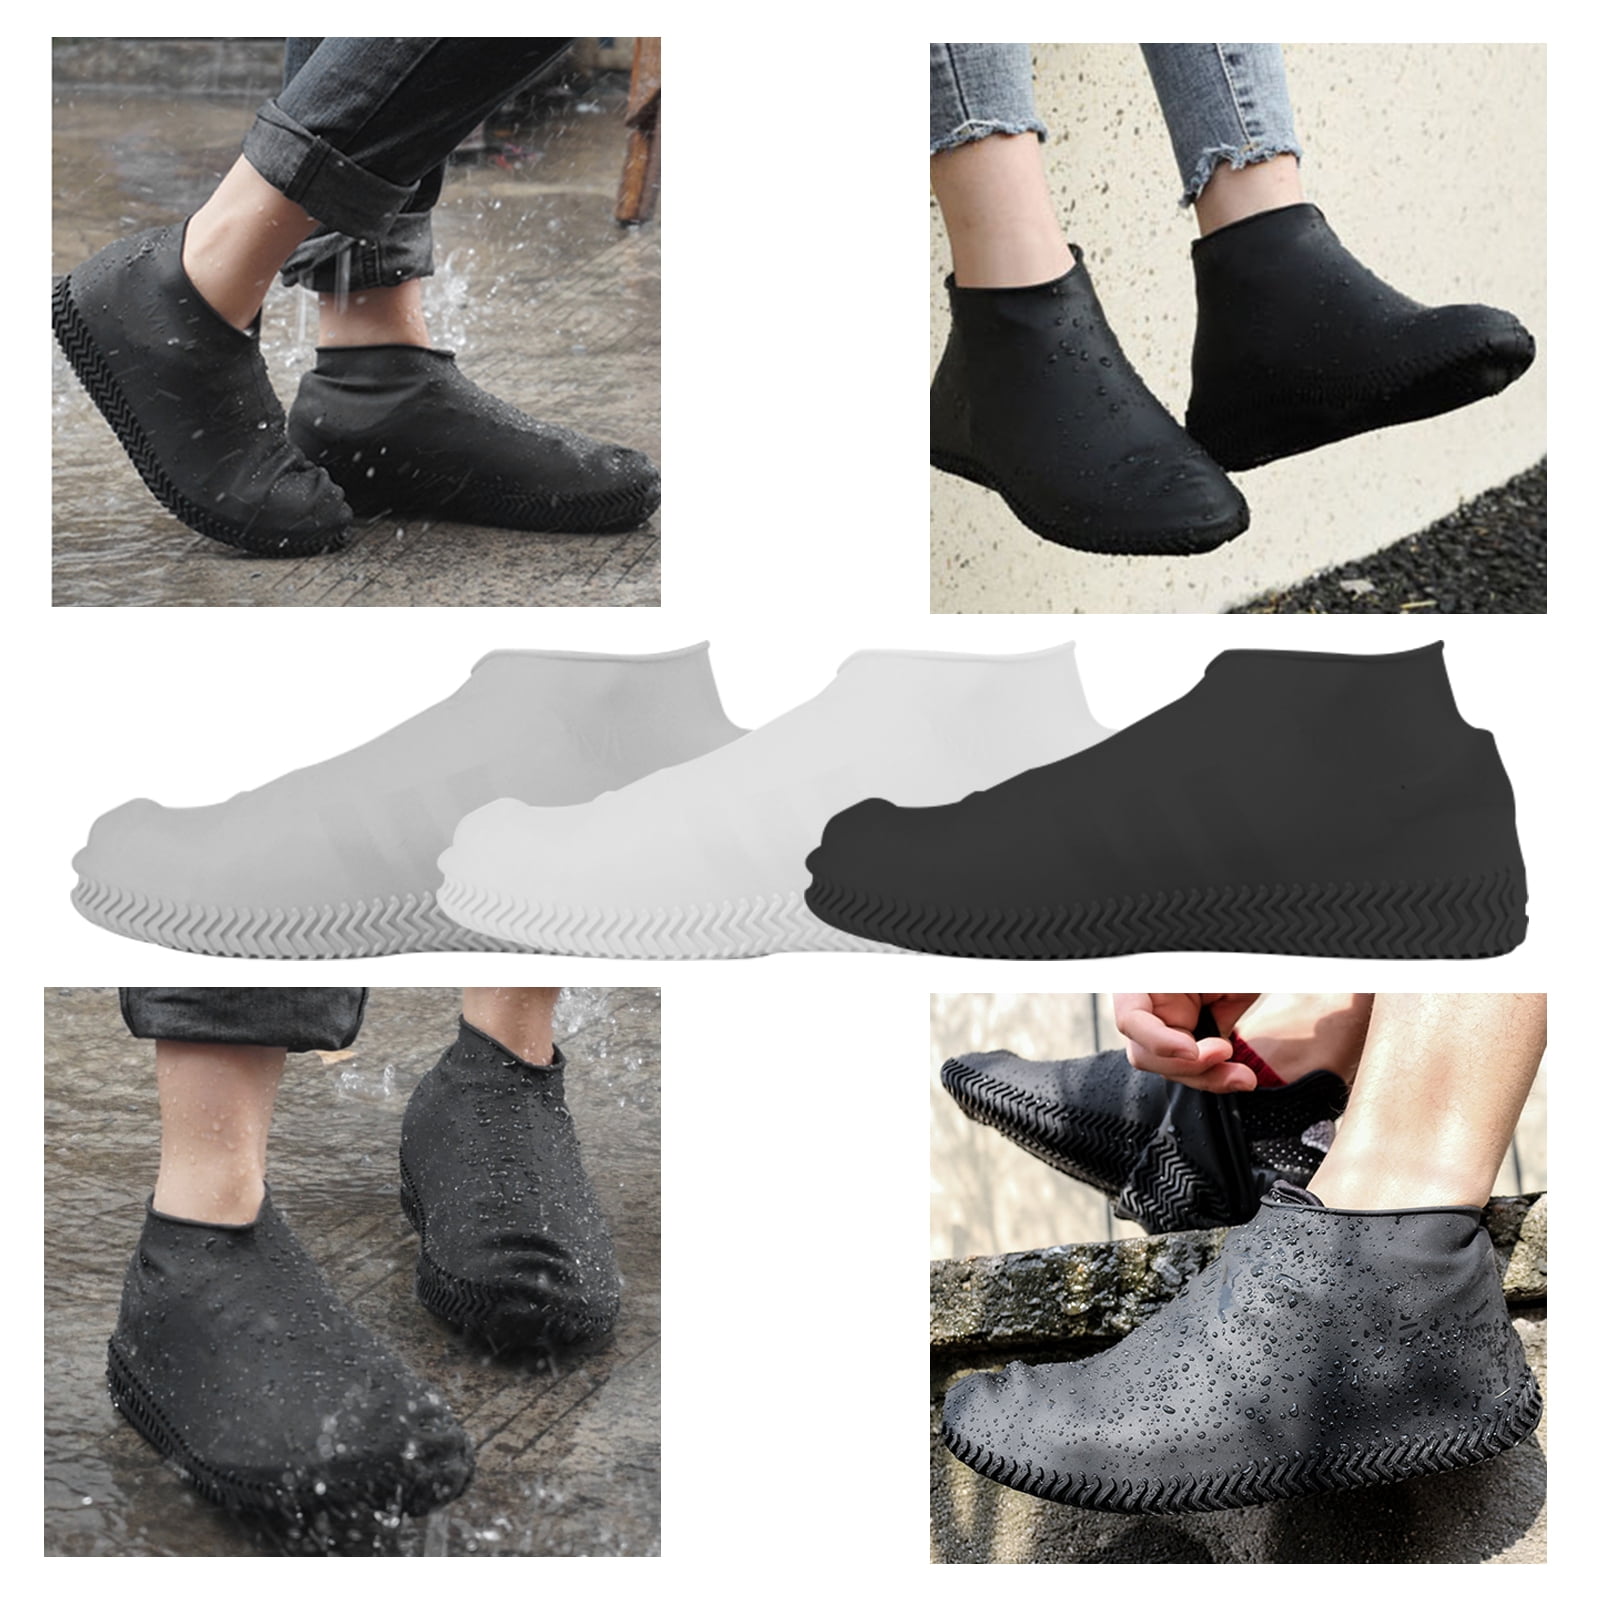 slip on rubber boot covers